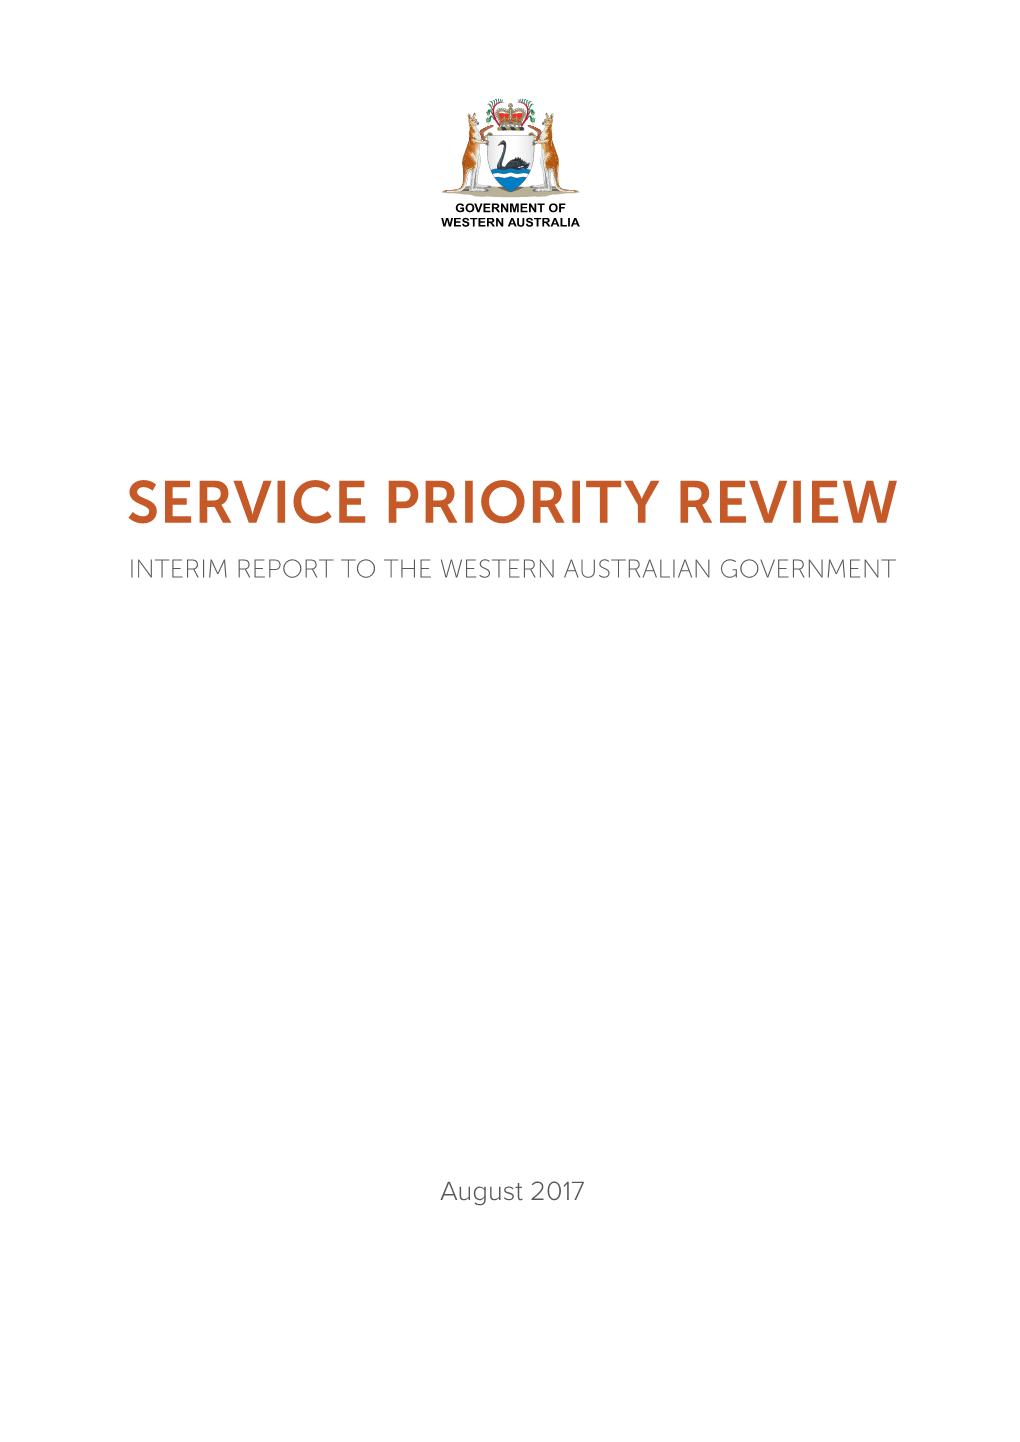 Service Priority Review Interim Report to the Western Australian Government